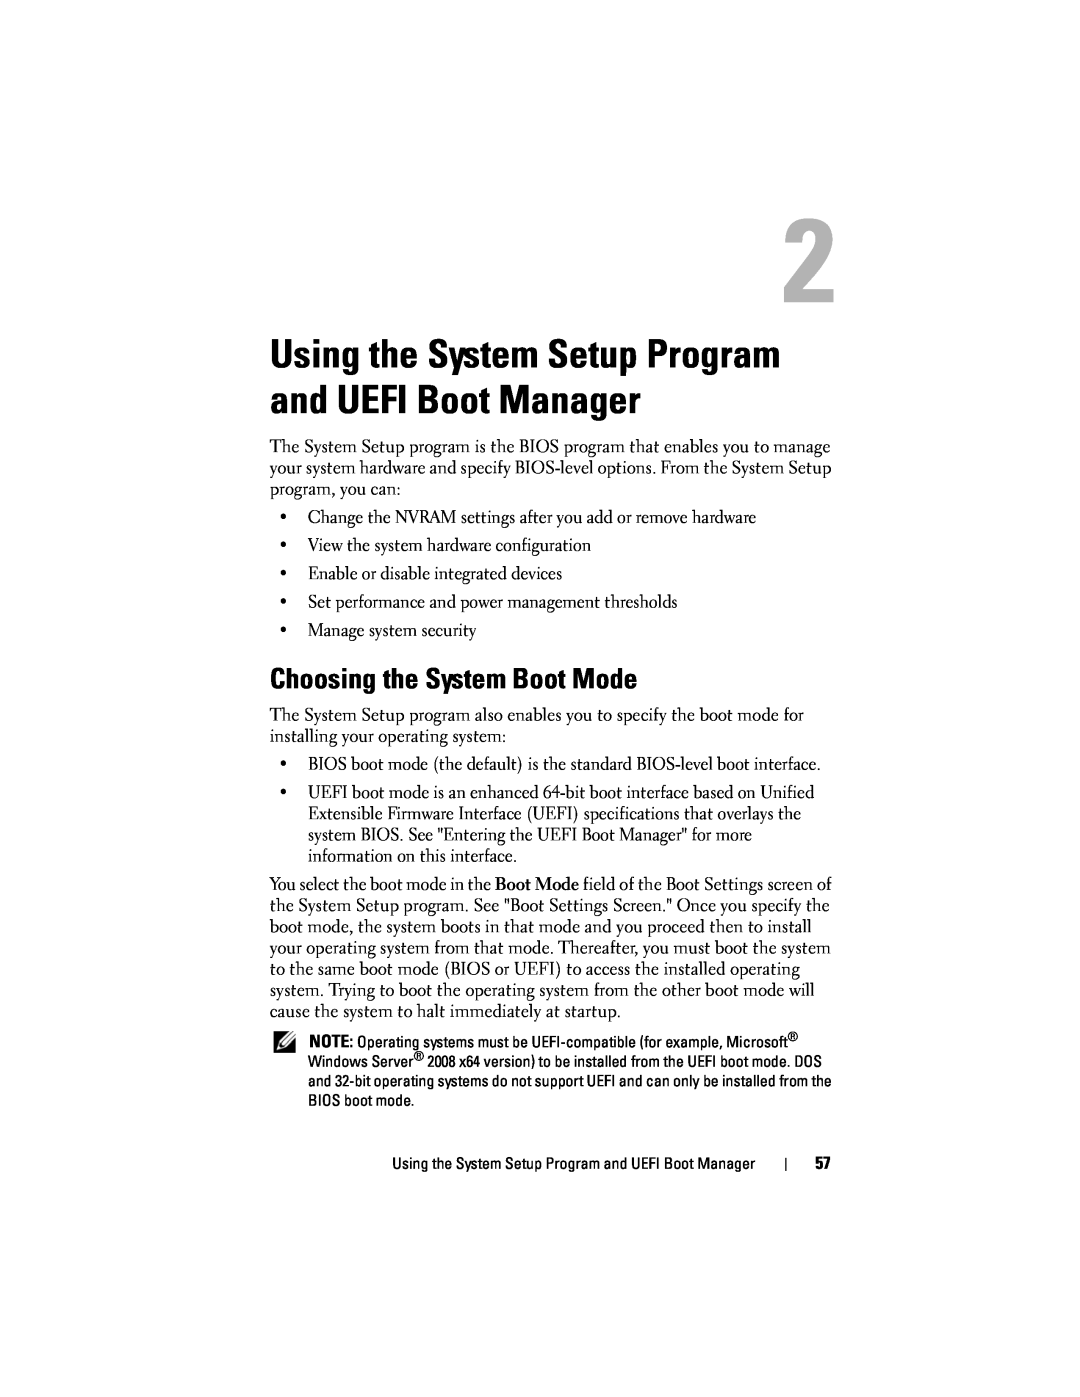 Dell R610 owner manual Choosing the System Boot Mode, Using the System Setup Program and UEFI Boot Manager 